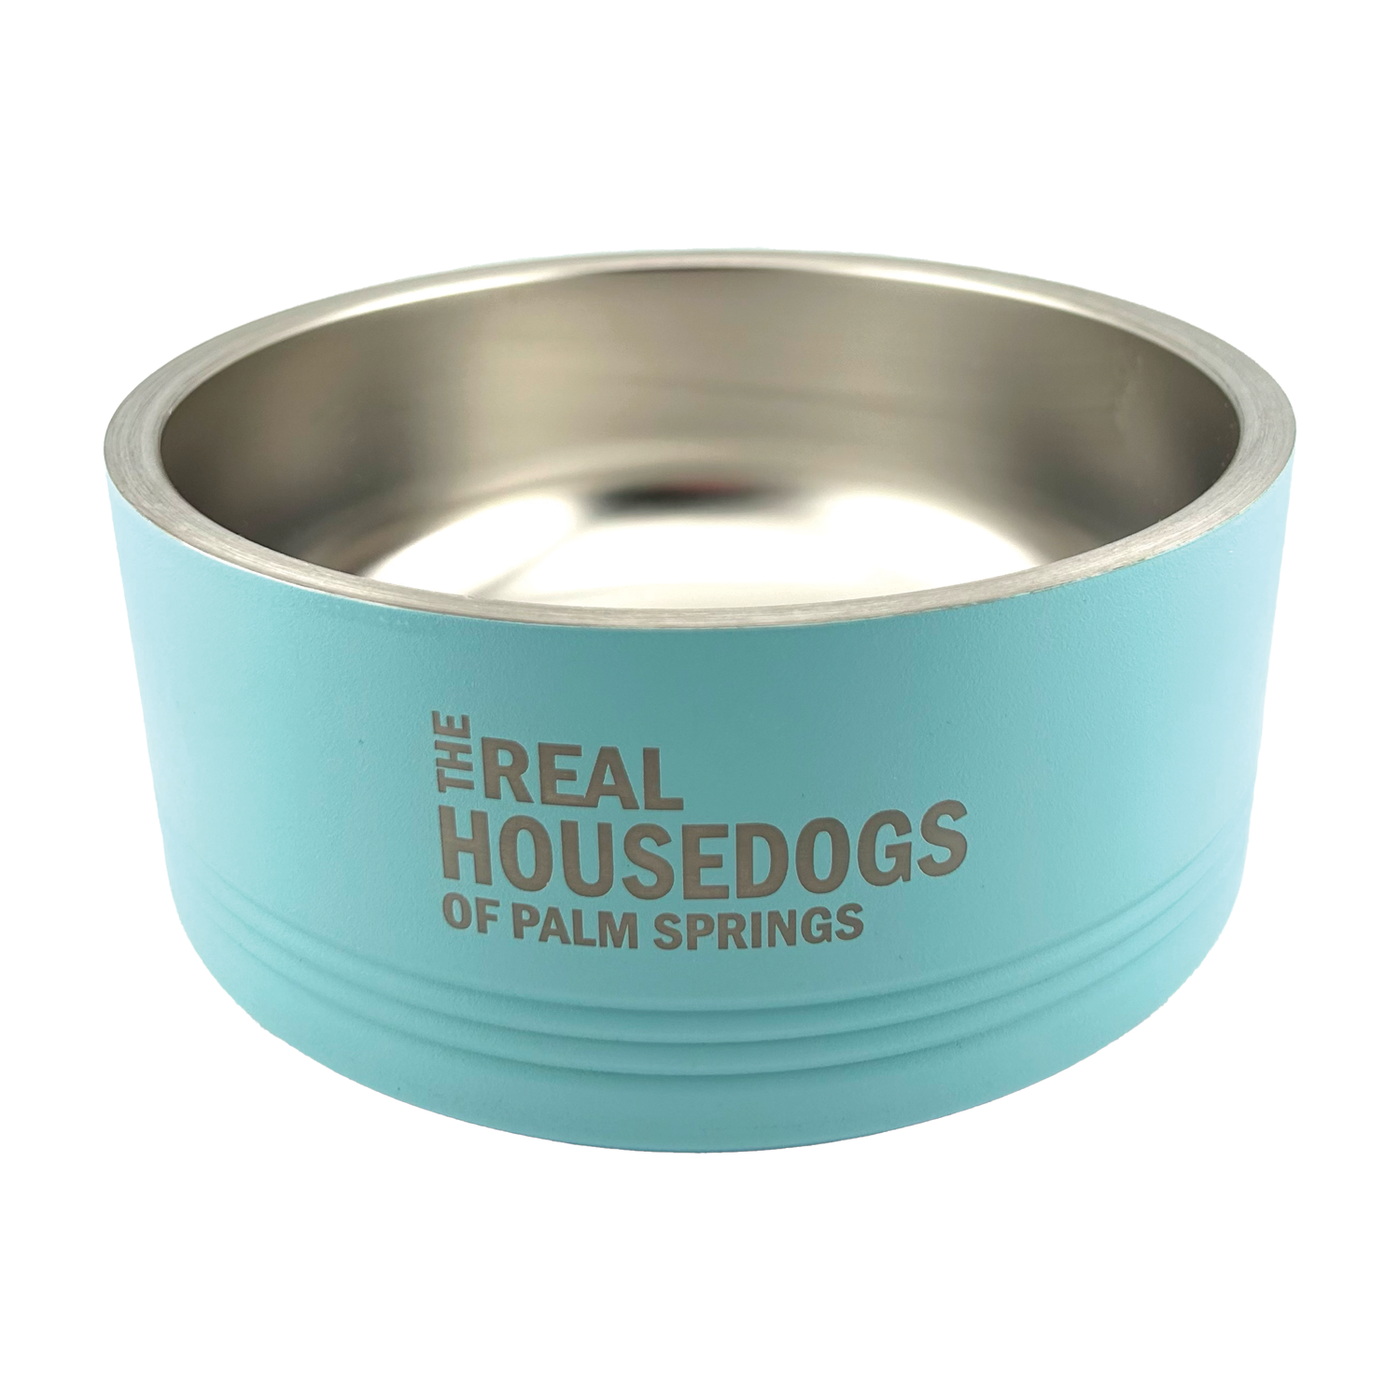 Real Housedogs of Palm Springs 32 Oz Dog Bowl - Teal